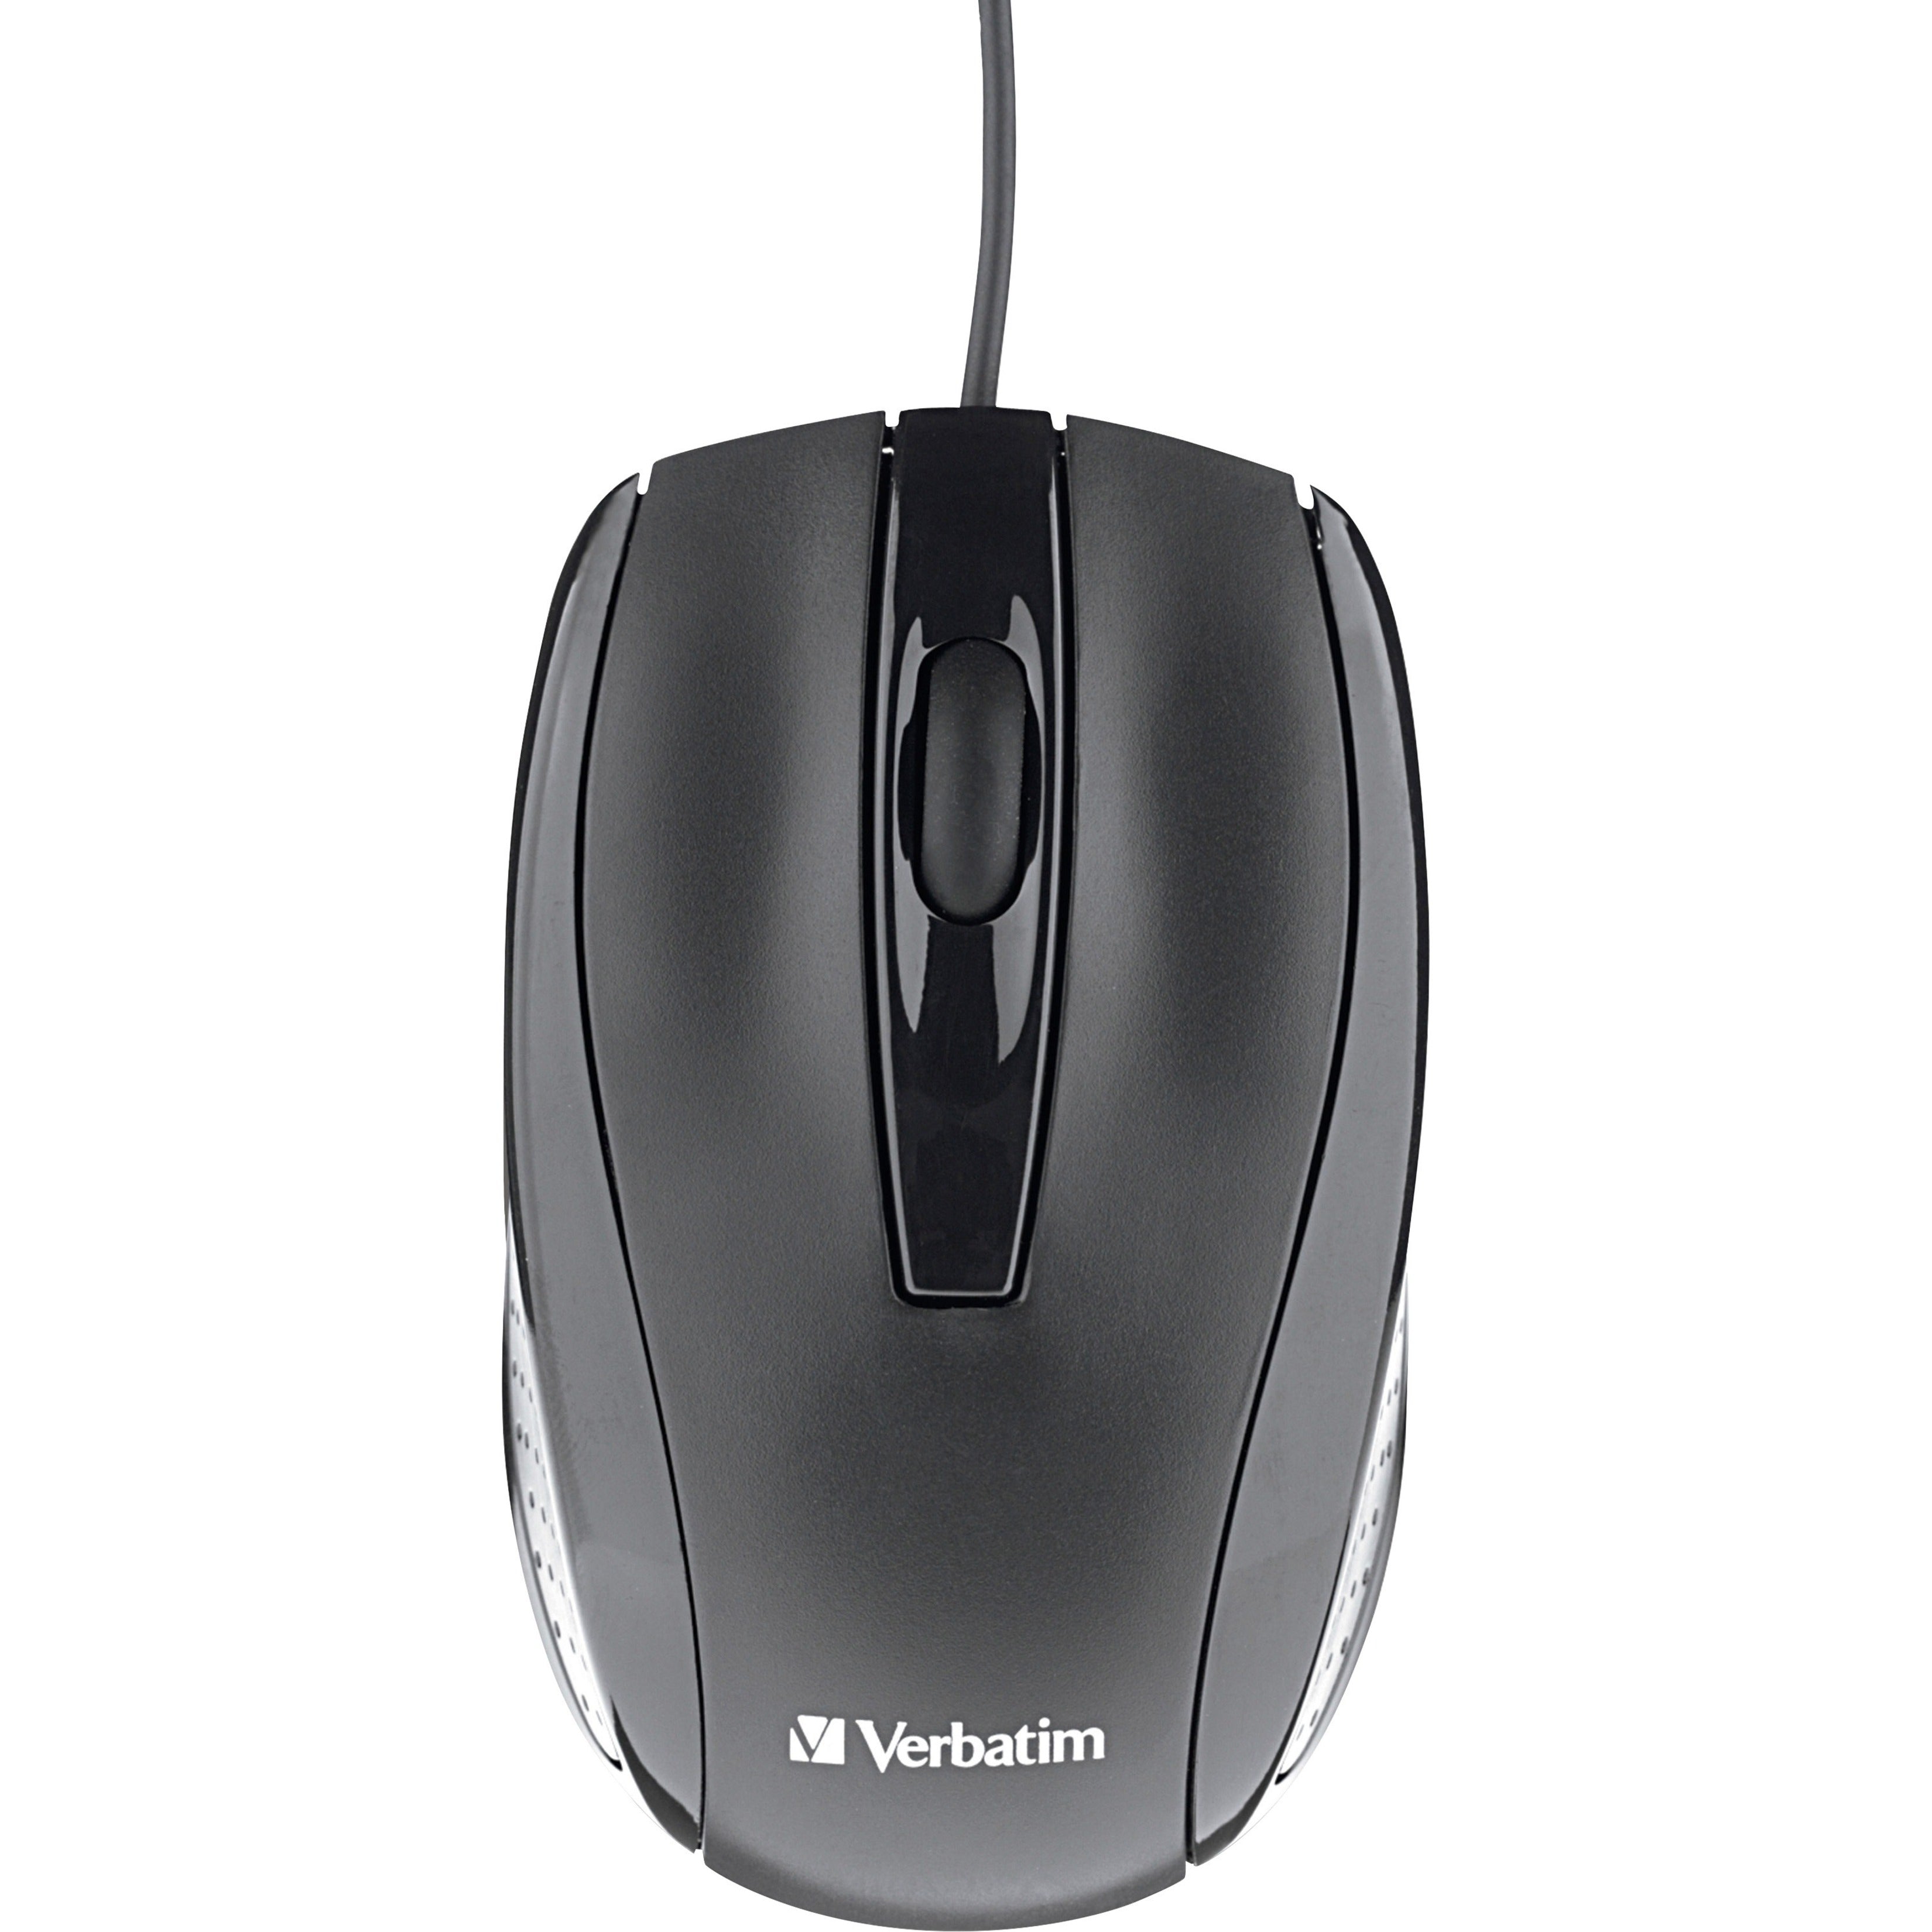 Verbatim 70733 Corded Optical Mouse - Black, 1 Year Warranty, Scroll Wheel, Cable Connectivity